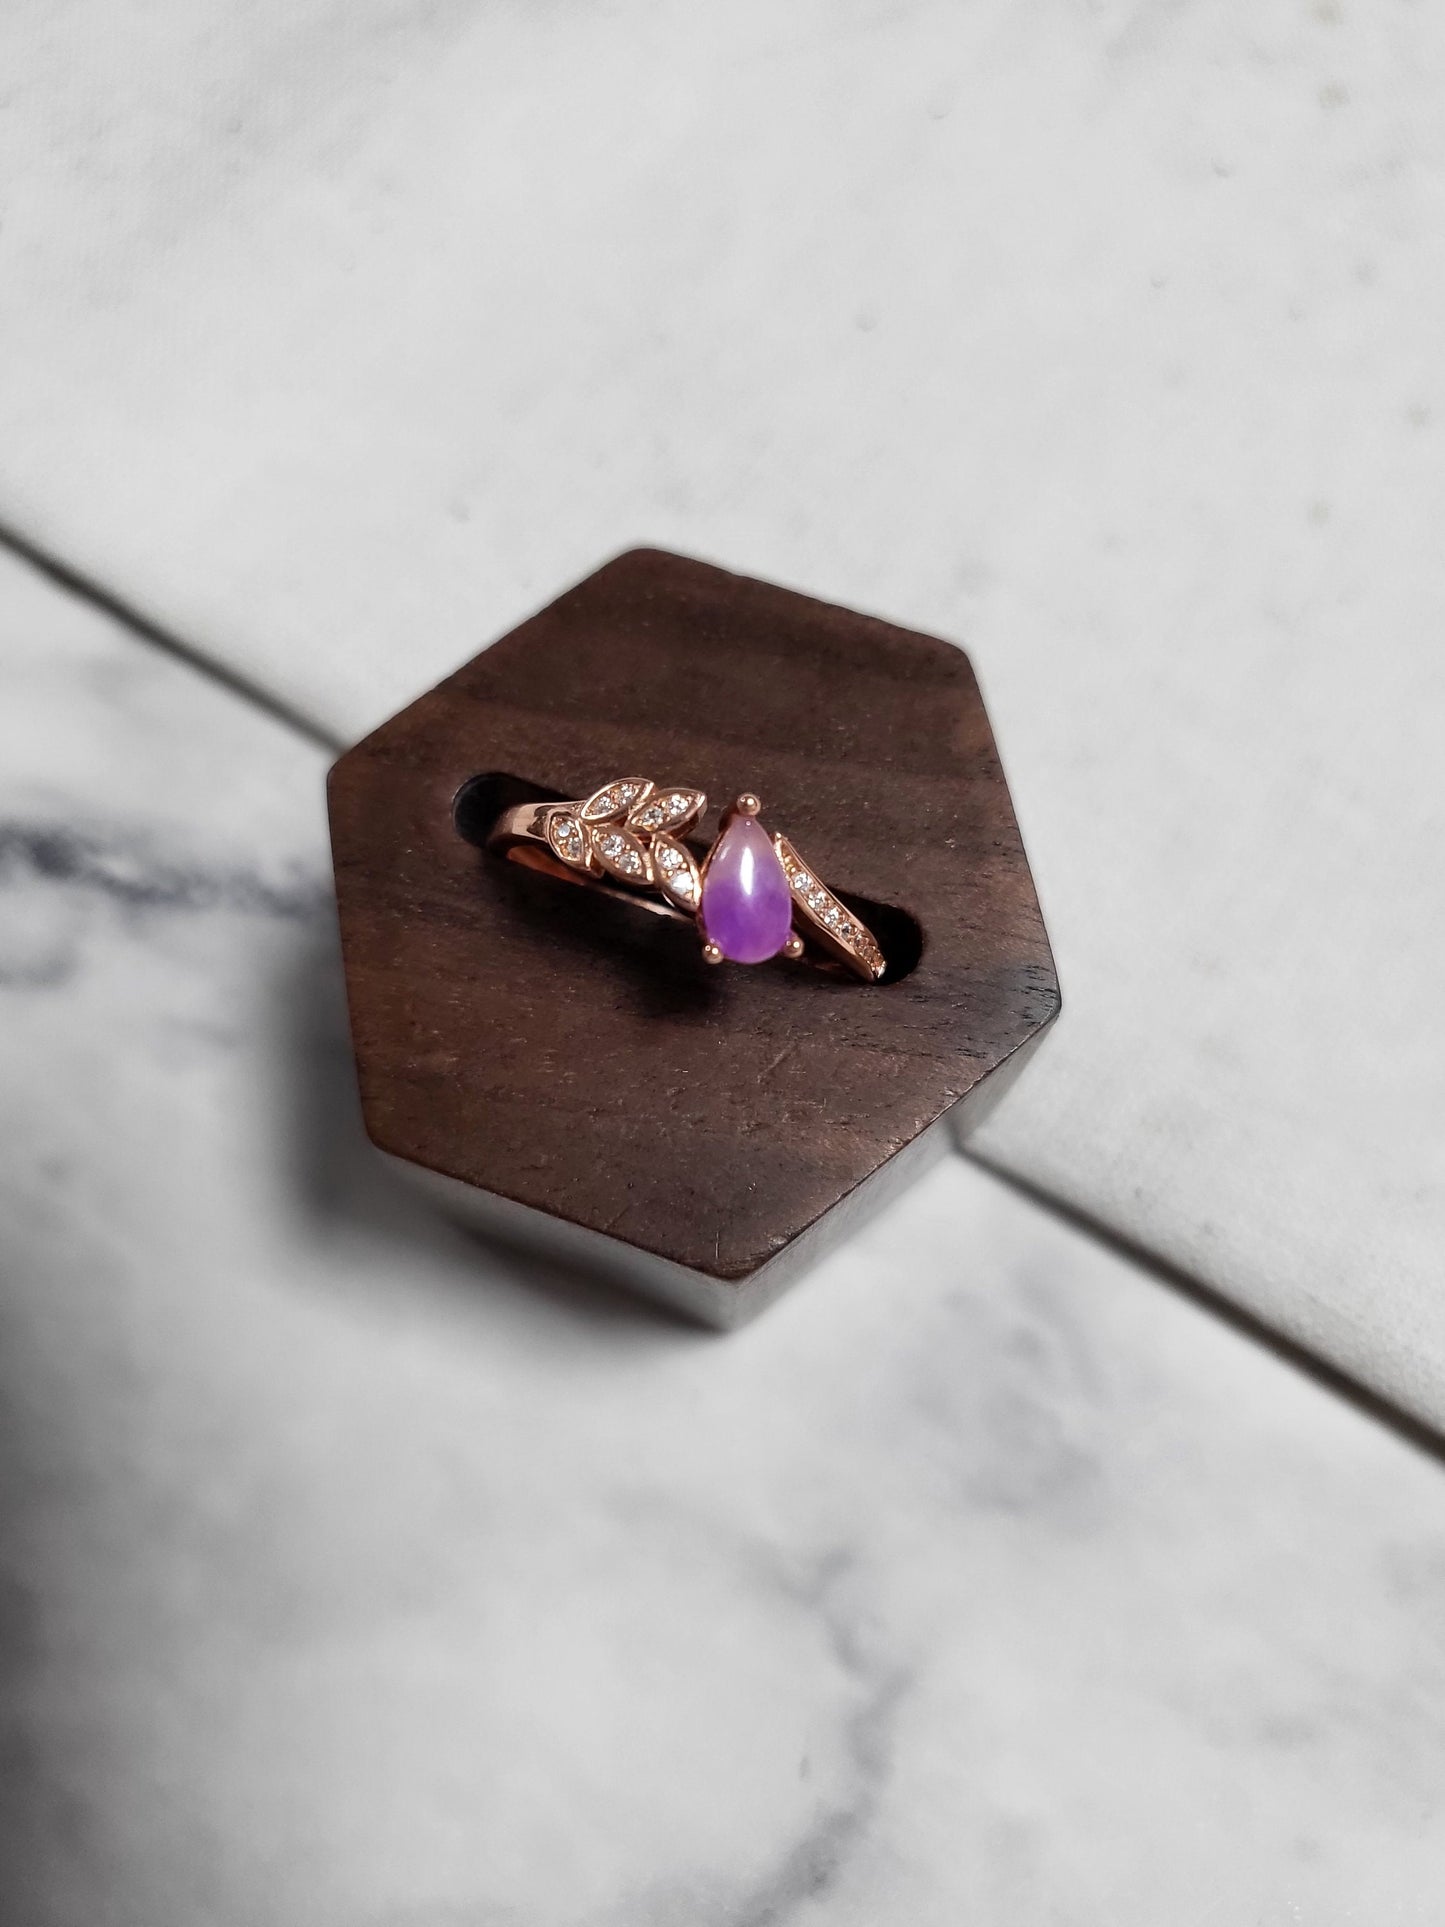 RARE Natural Sugilite Ring Stone Purple Gemstone Dainty Adjustable Rose Gold Ring with Crystals